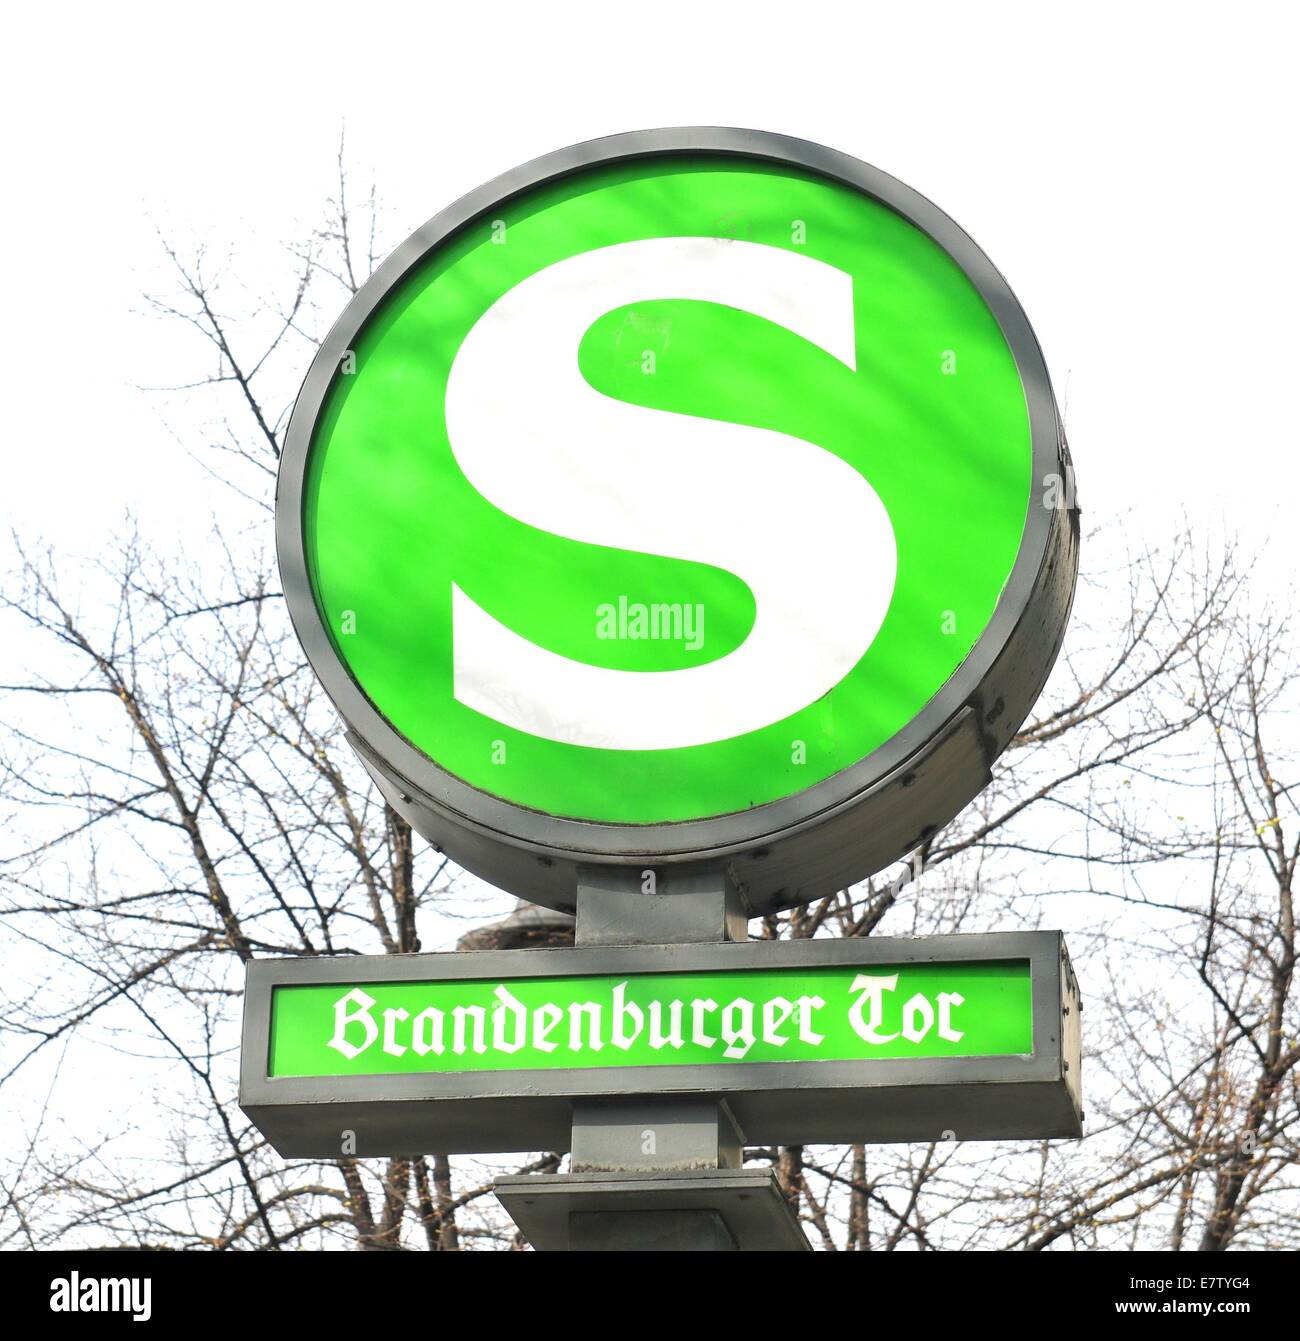 Detail of metro sign in Berlin, Germany Stock Photo - Alamy